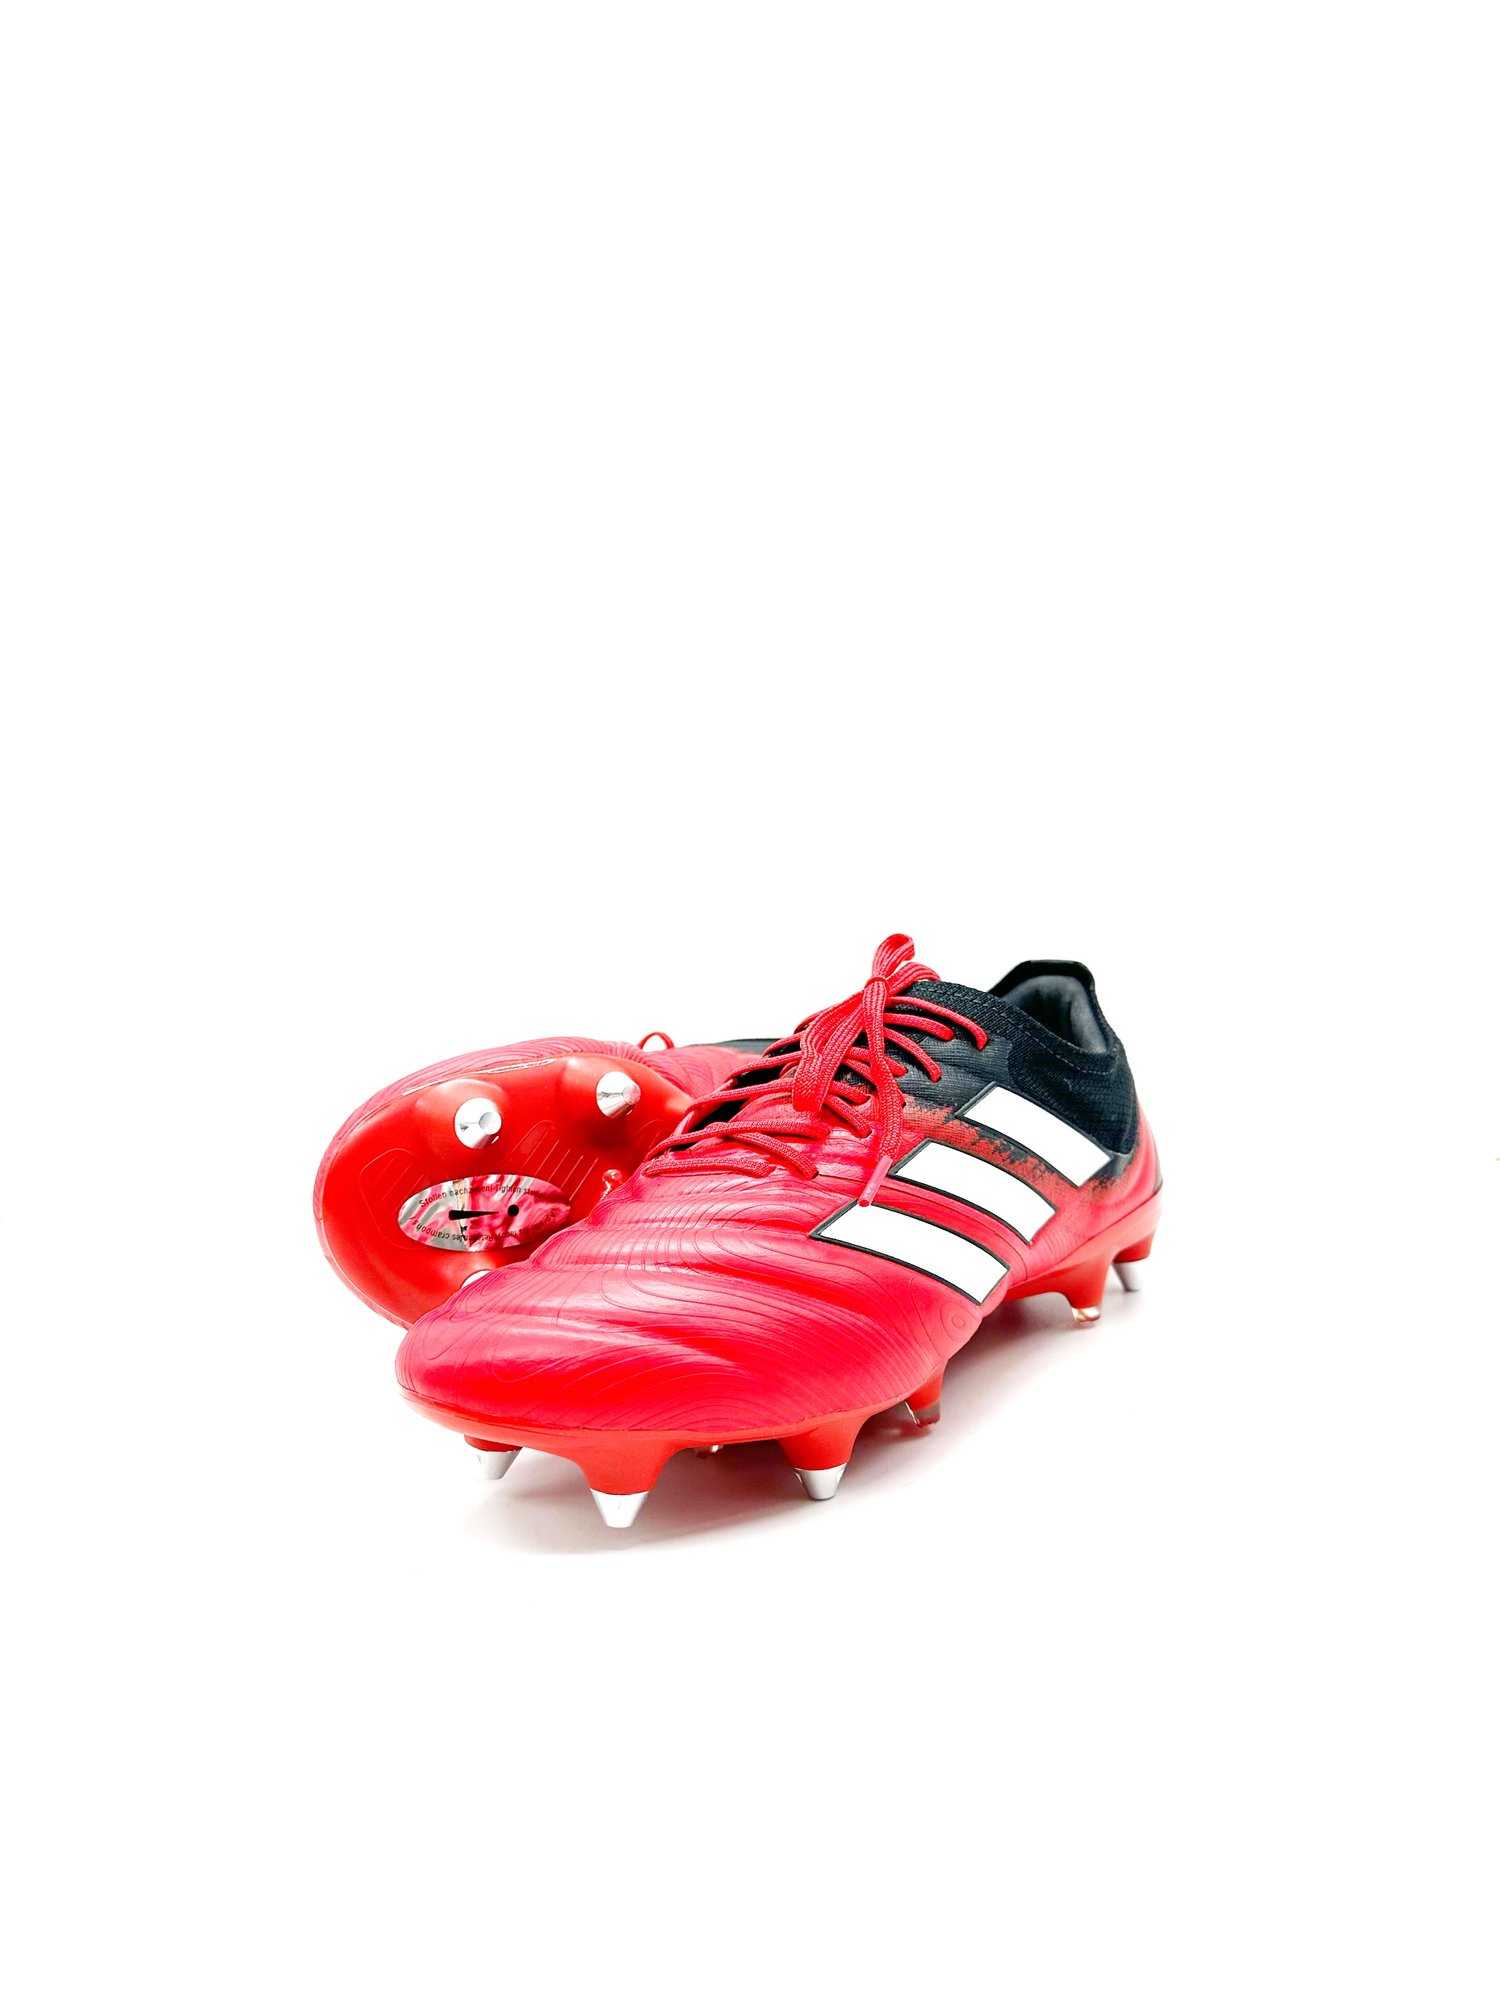 Image of Adidas Copa 20.1 FG RED